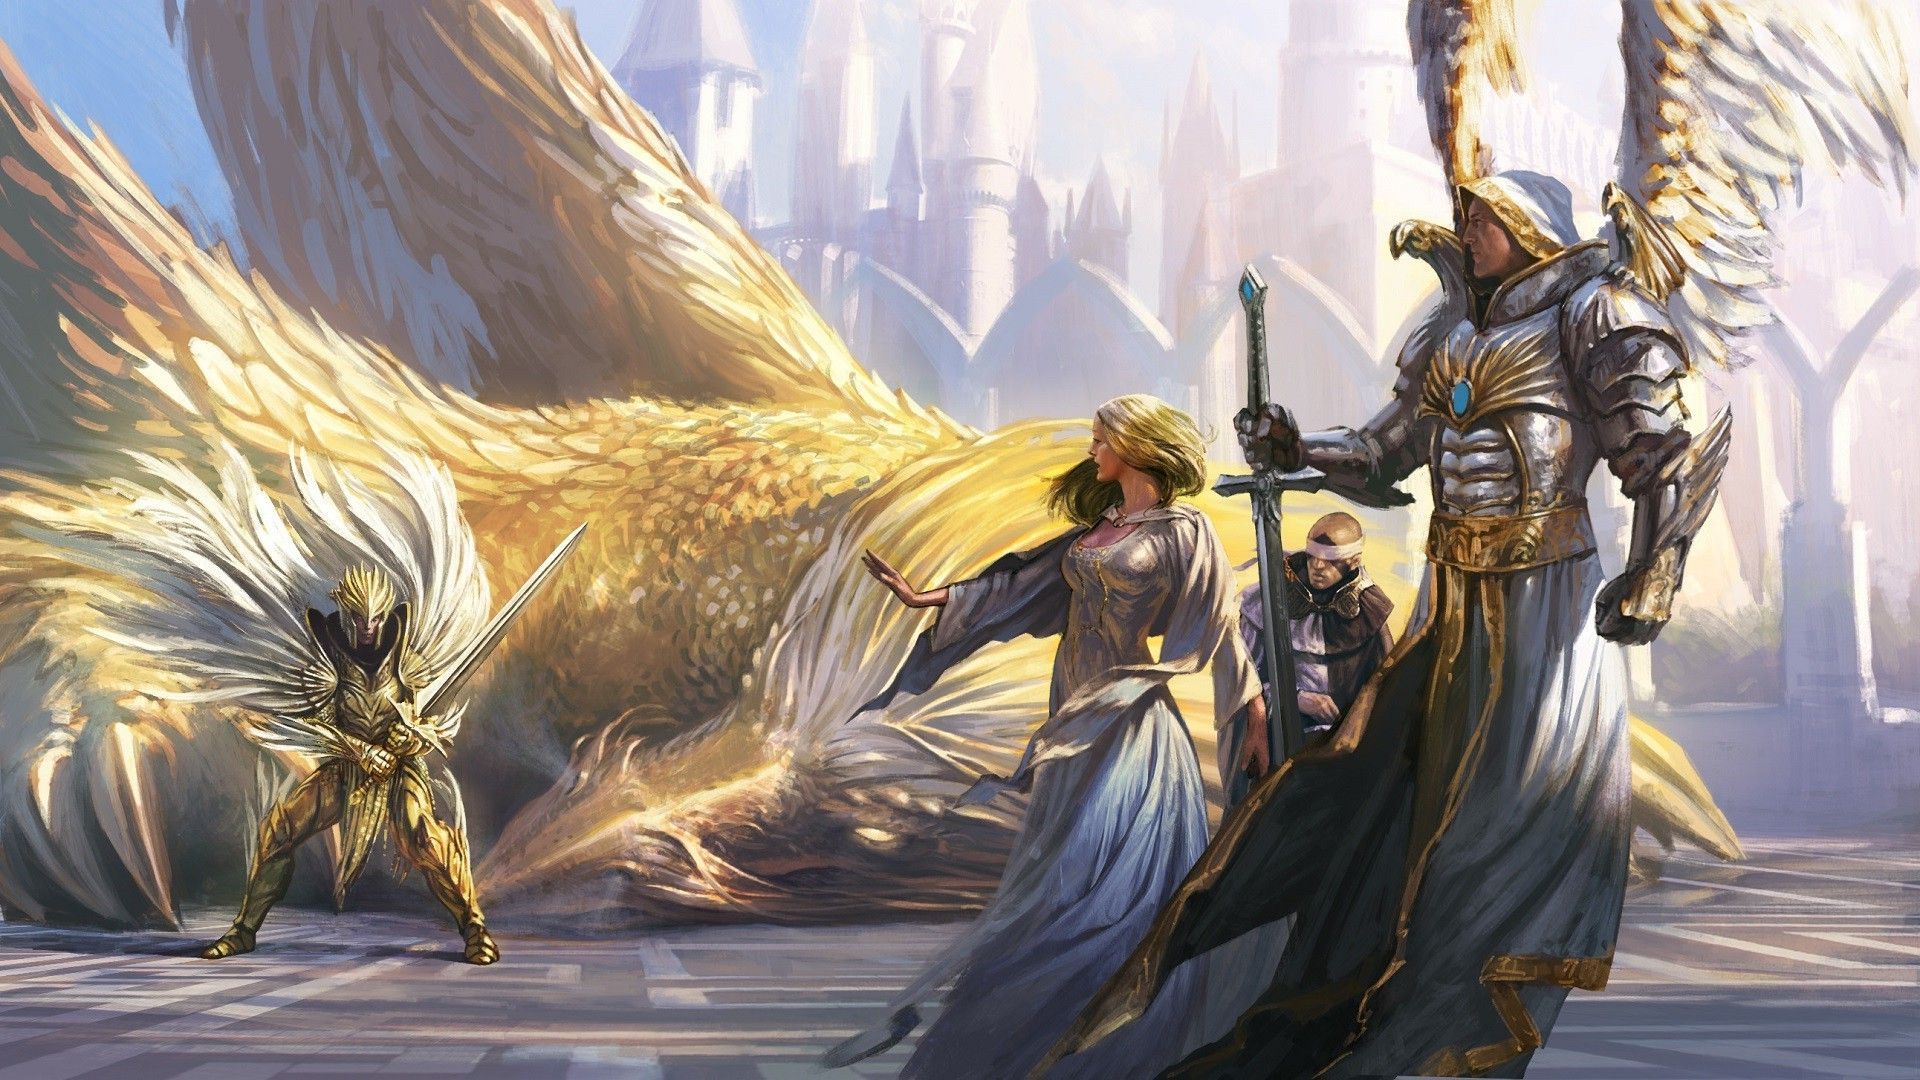 Might And Magic, Heroes Of Might And Magic, Fantasy Art, Angel, Wings, Armor, Sword, Knight, Knights, Women, Griff. Fantasy art, Fantasy art angels, Fantasy armor